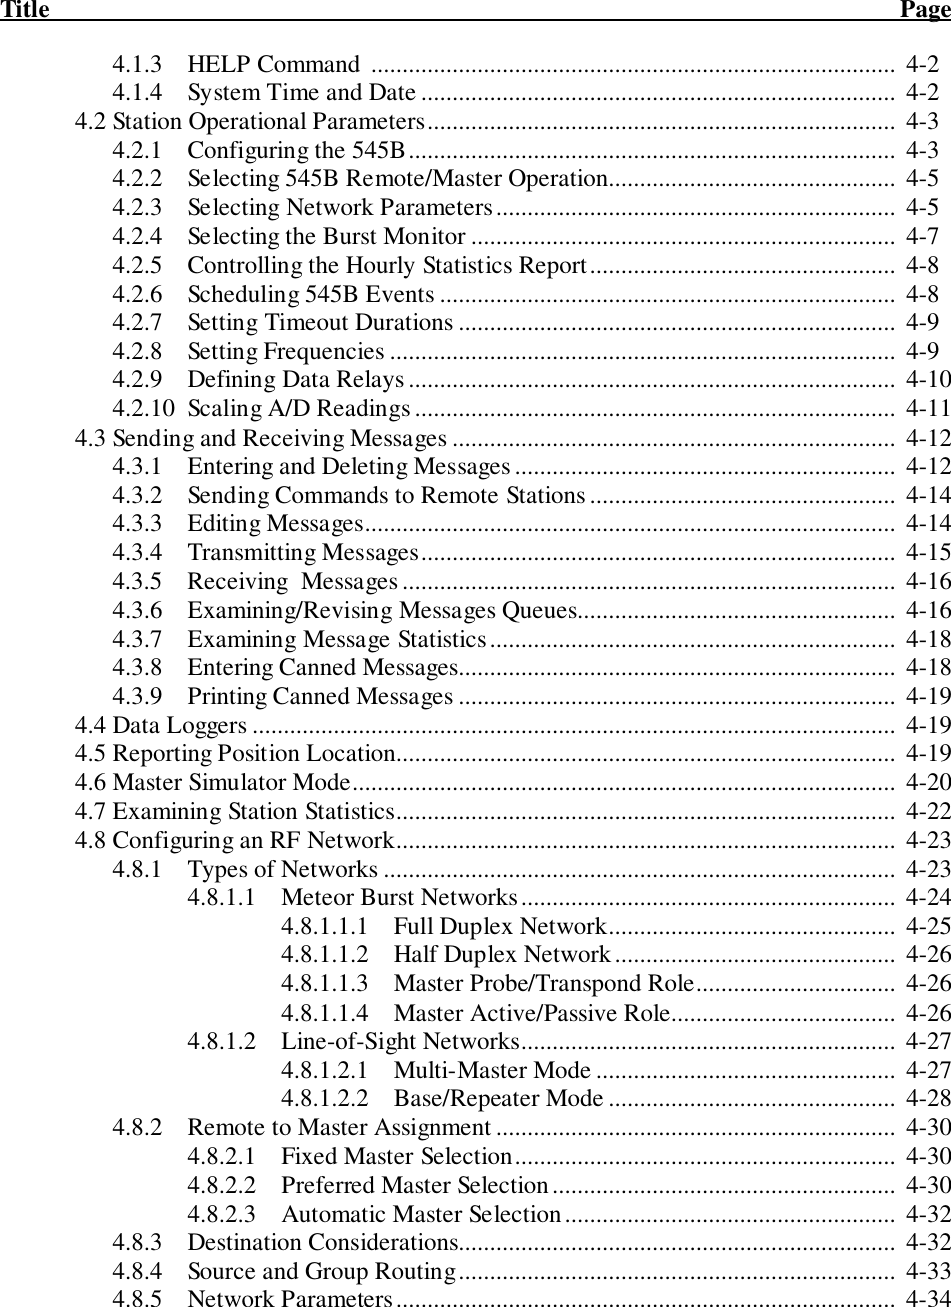 Title                                                                                                                                        Page4.1.3 HELP Command  ....................................................................................  4-24.1.4 System Time and Date ............................................................................  4-24.2 Station Operational Parameters...........................................................................  4-34.2.1 Configuring the 545B..............................................................................  4-34.2.2 Selecting 545B Remote/Master Operation..............................................  4-54.2.3 Selecting Network Parameters................................................................  4-54.2.4 Selecting the Burst Monitor .................................................................... 4-74.2.5 Controlling the Hourly Statistics Report.................................................  4-84.2.6 Scheduling 545B Events ......................................................................... 4-84.2.7 Setting Timeout Durations ......................................................................  4-94.2.8 Setting Frequencies .................................................................................  4-94.2.9 Defining Data Relays..............................................................................  4-104.2.10 Scaling A/D Readings.............................................................................  4-114.3 Sending and Receiving Messages .......................................................................  4-124.3.1 Entering and Deleting Messages .............................................................  4-124.3.2 Sending Commands to Remote Stations.................................................  4-144.3.3 Editing Messages.....................................................................................  4-144.3.4 Transmitting Messages............................................................................  4-154.3.5 Receiving  Messages...............................................................................  4-164.3.6 Examining/Revising Messages Queues...................................................  4-164.3.7 Examining Message Statistics.................................................................  4-184.3.8 Entering Canned Messages......................................................................  4-184.3.9 Printing Canned Messages ......................................................................  4-194.4 Data Loggers .......................................................................................................  4-194.5 Reporting Position Location................................................................................  4-194.6 Master Simulator Mode.......................................................................................  4-204.7 Examining Station Statistics................................................................................  4-224.8 Configuring an RF Network................................................................................  4-234.8.1 Types of Networks ..................................................................................  4-234.8.1.1 Meteor Burst Networks............................................................  4-244.8.1.1.1 Full Duplex Network..............................................  4-254.8.1.1.2 Half Duplex Network.............................................  4-264.8.1.1.3 Master Probe/Transpond Role................................  4-264.8.1.1.4   Master Active/Passive Role.................................... 4-264.8.1.2 Line-of-Sight Networks............................................................  4-274.8.1.2.1 Multi-Master Mode ................................................  4-274.8.1.2.2 Base/Repeater Mode ..............................................  4-284.8.2 Remote to Master Assignment ................................................................  4-304.8.2.1 Fixed Master Selection.............................................................  4-304.8.2.2 Preferred Master Selection.......................................................  4-304.8.2.3 Automatic Master Selection.....................................................  4-324.8.3 Destination Considerations......................................................................  4-324.8.4 Source and Group Routing......................................................................  4-334.8.5 Network Parameters................................................................................  4-34